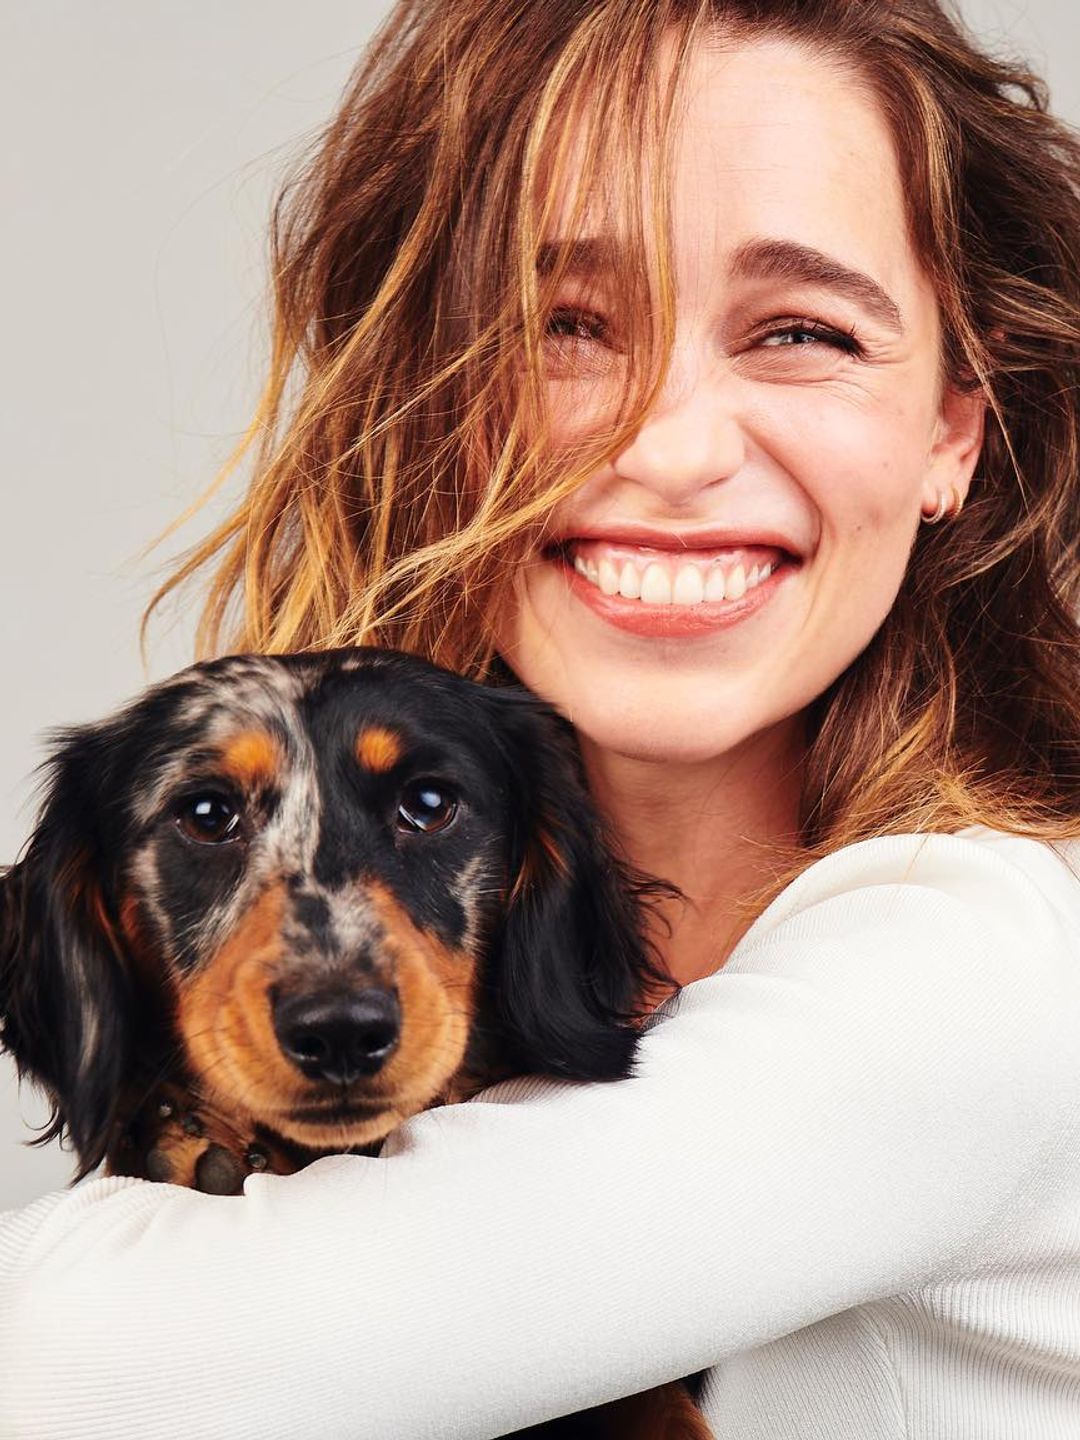 Emilia Clarke who are her parents